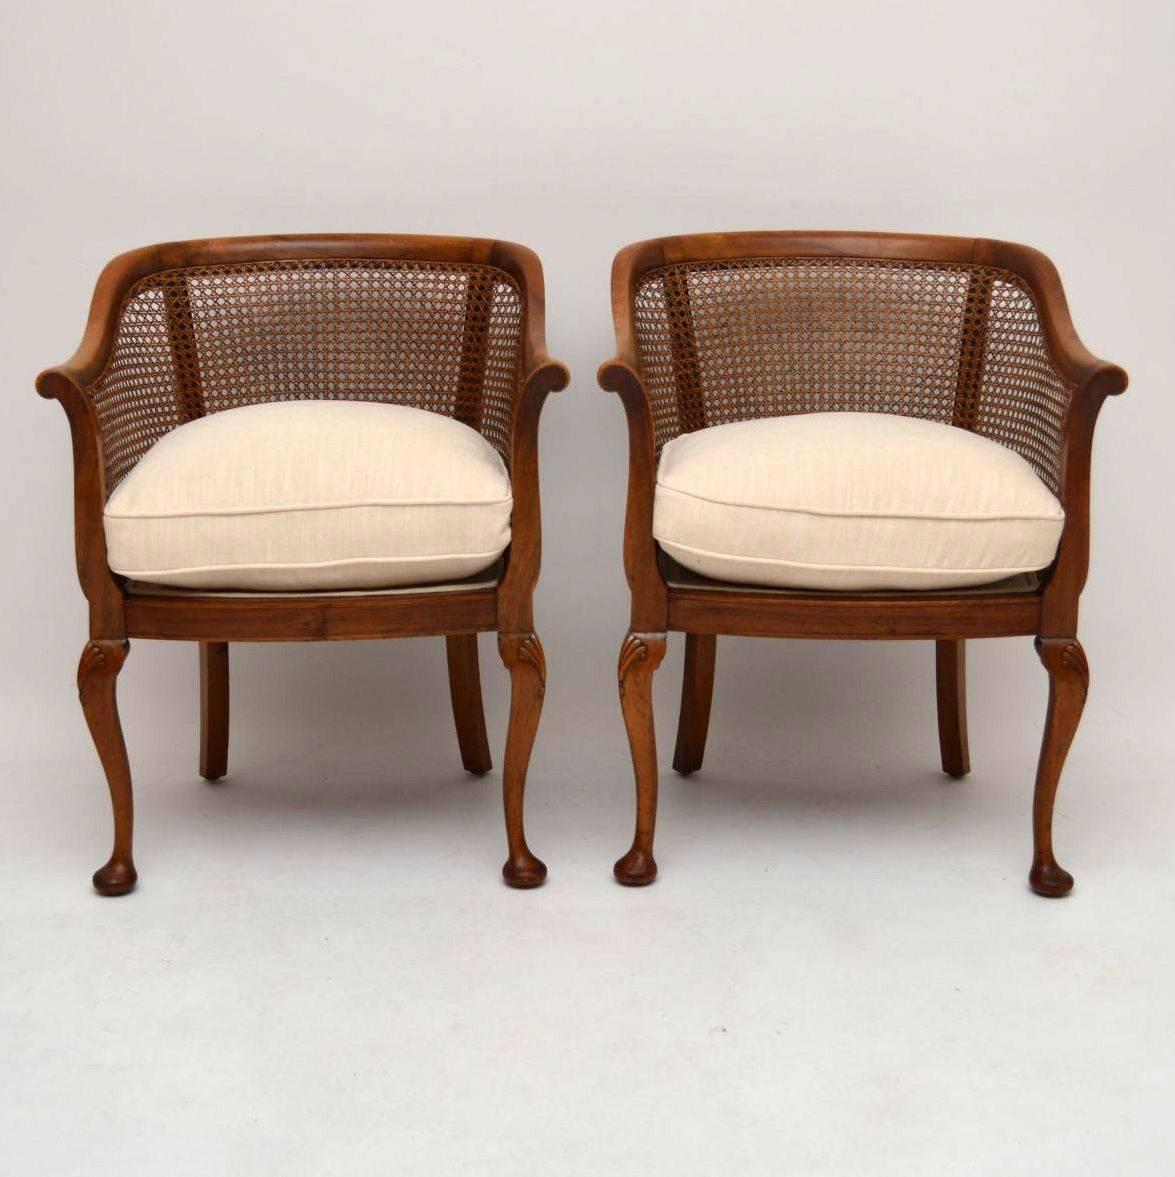 Pair of antique solid mahogany tub backed armchairs with original cane and carved Queen Anne legs. They are in excellent condition all-over and the wood has a nice warm color. They have just been re-upholstered in a cream fabric and the cushion are